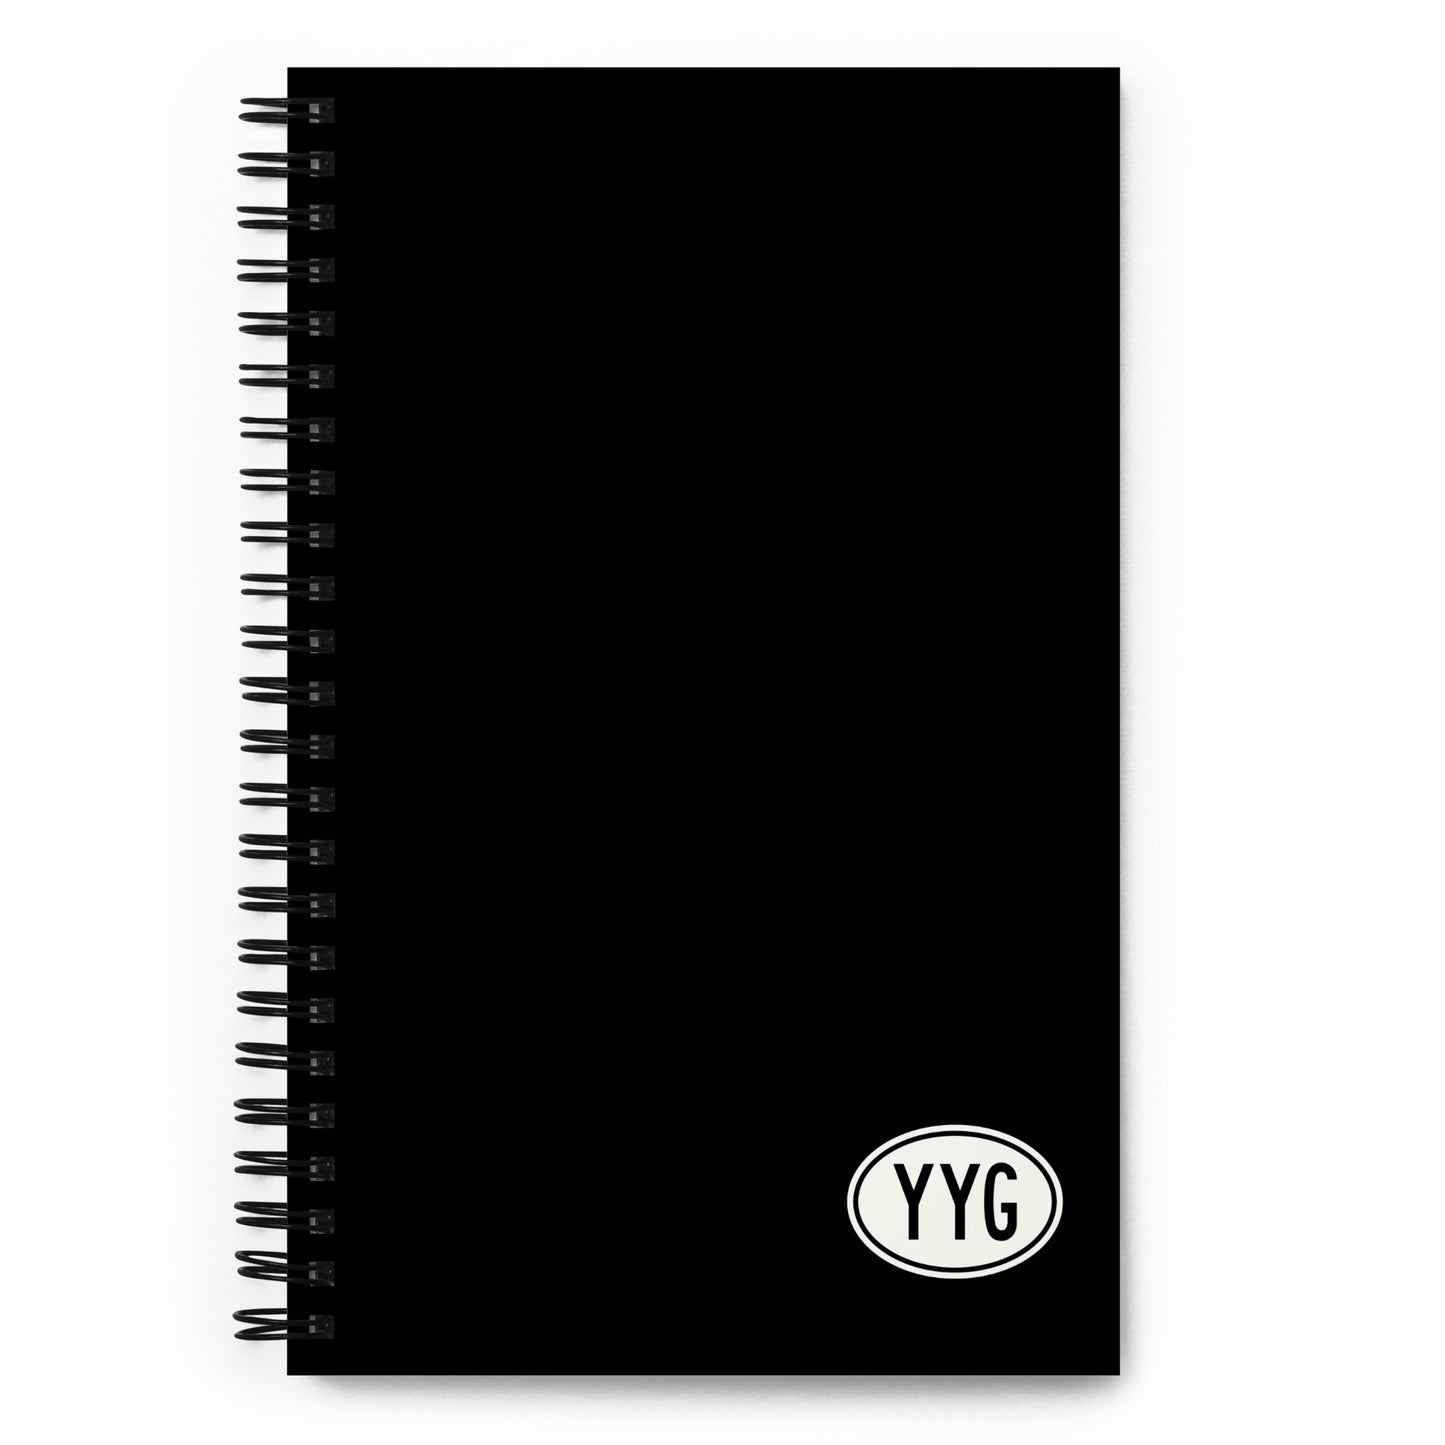 Unique Travel Gift Spiral Notebook - White Oval • YYG Charlottetown • YHM Designs - Image 01